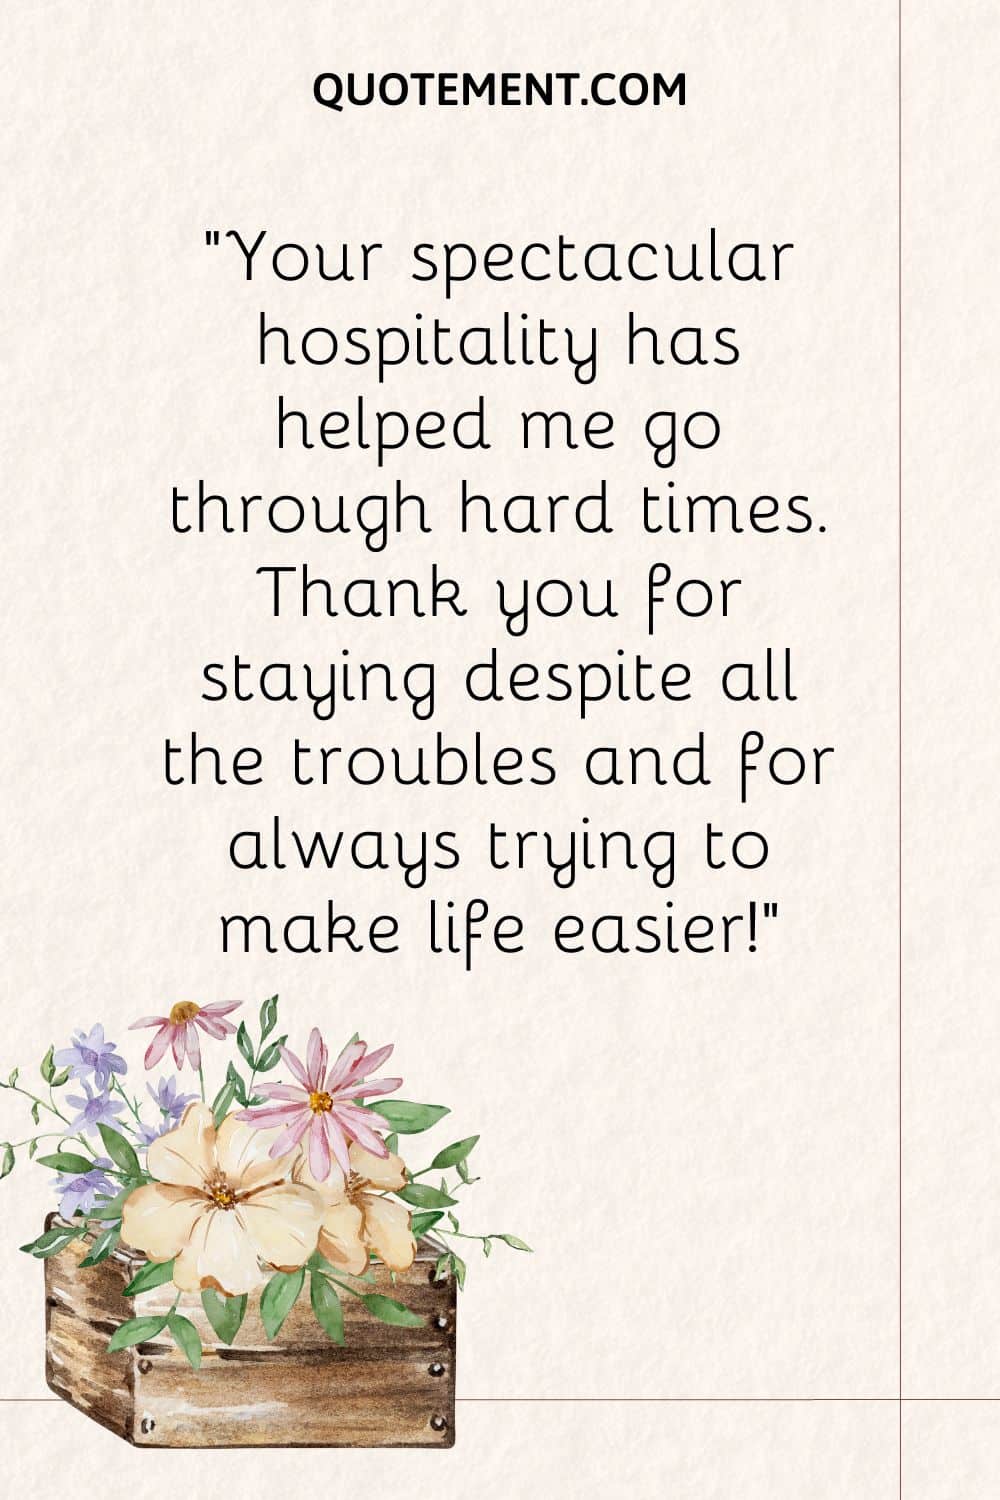 Your spectacular hospitality has helped me go through hard times.